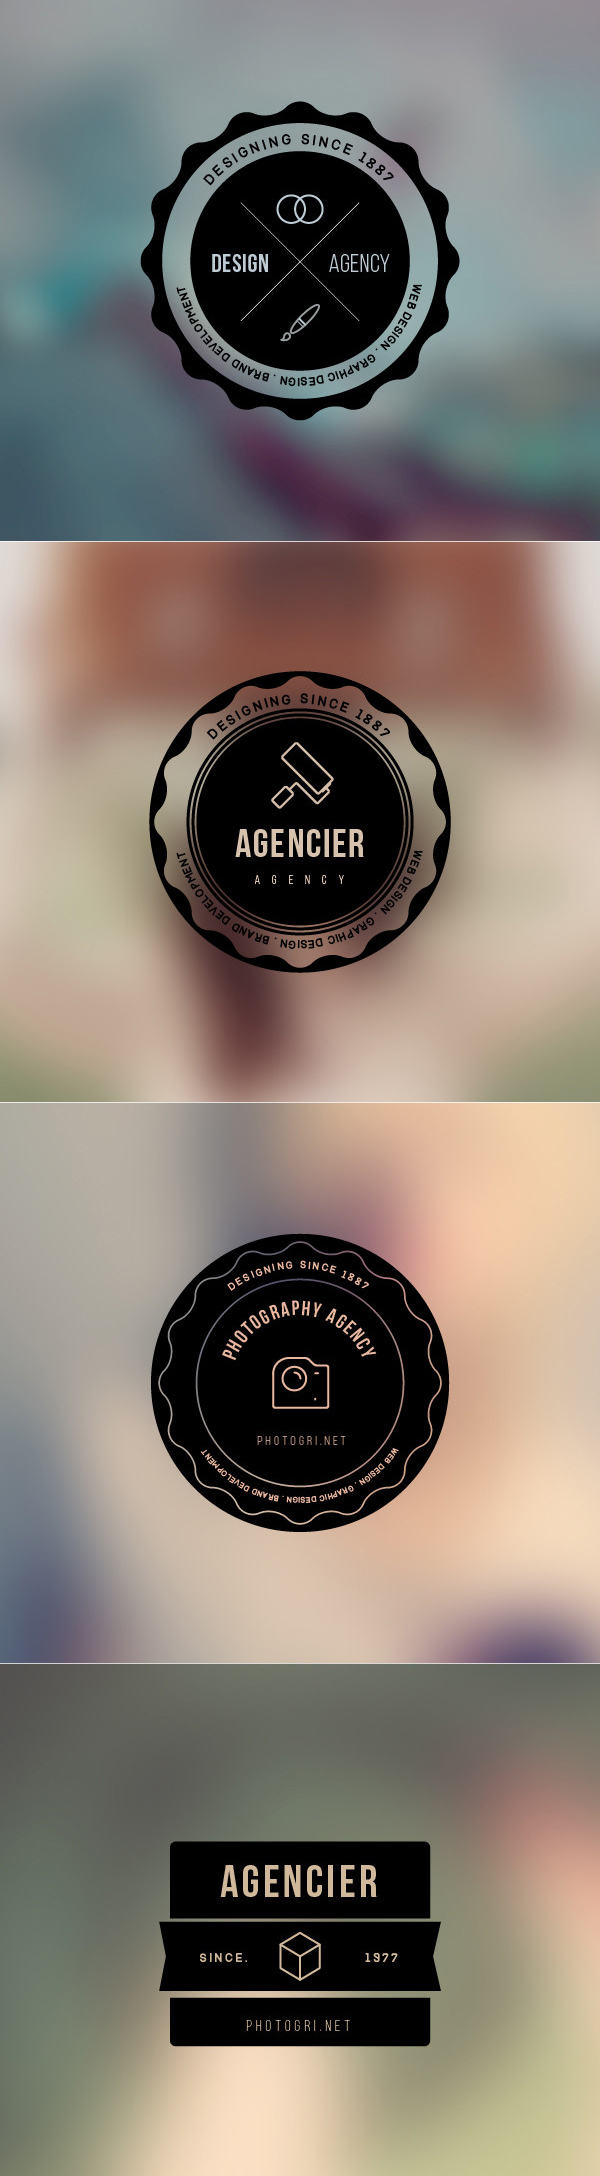 Free Vector Badges PSD Files